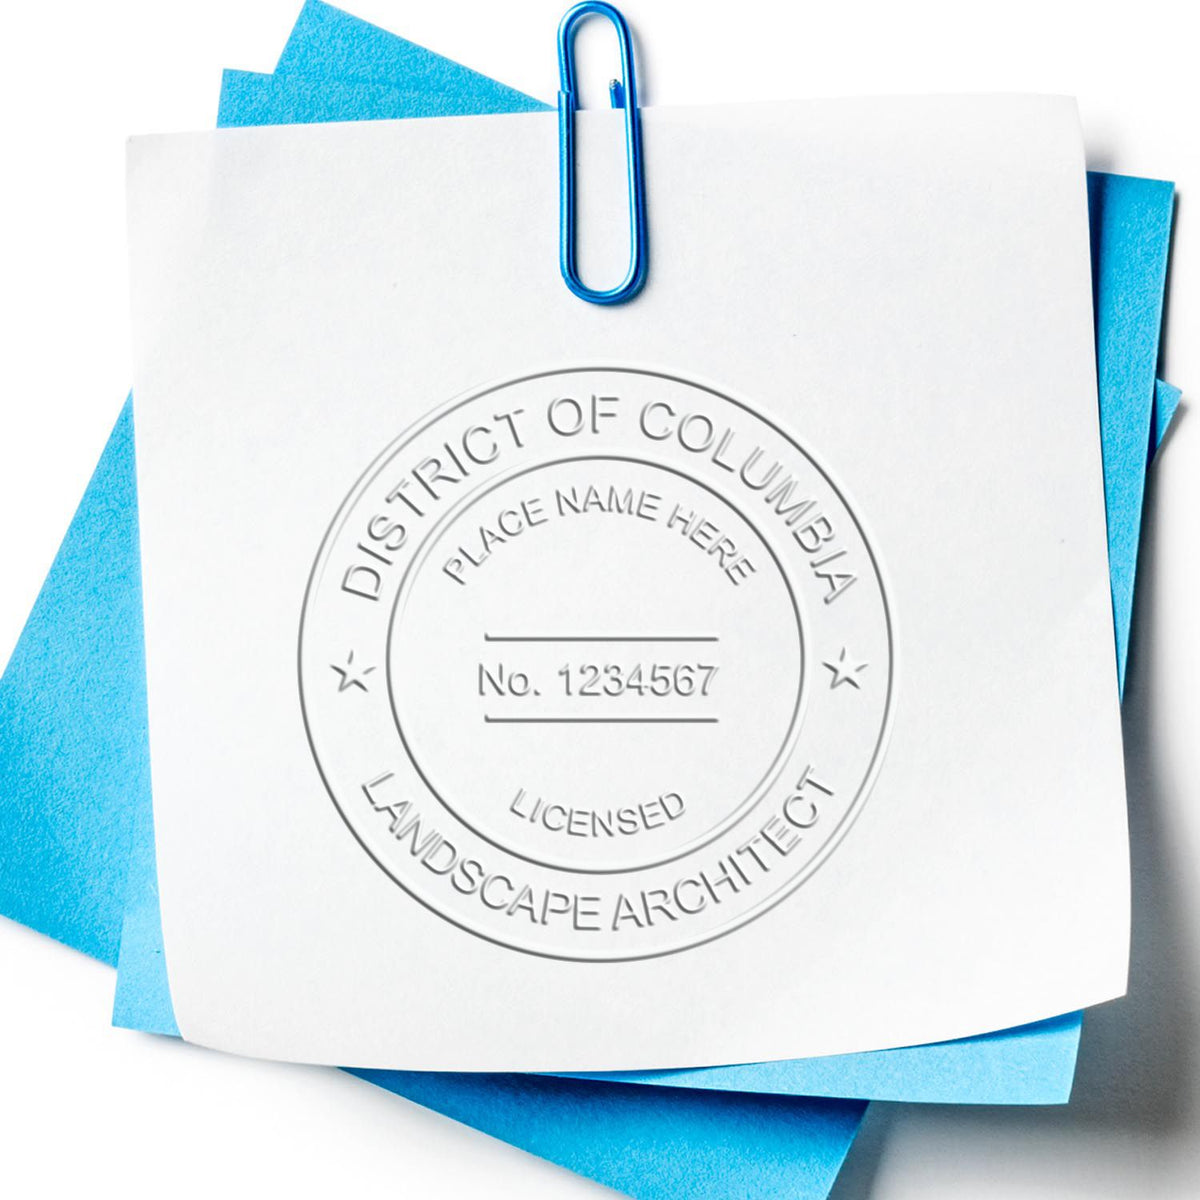 The Gift Delaware Landscape Architect Seal stamp impression comes to life with a crisp, detailed image stamped on paper - showcasing true professional quality.